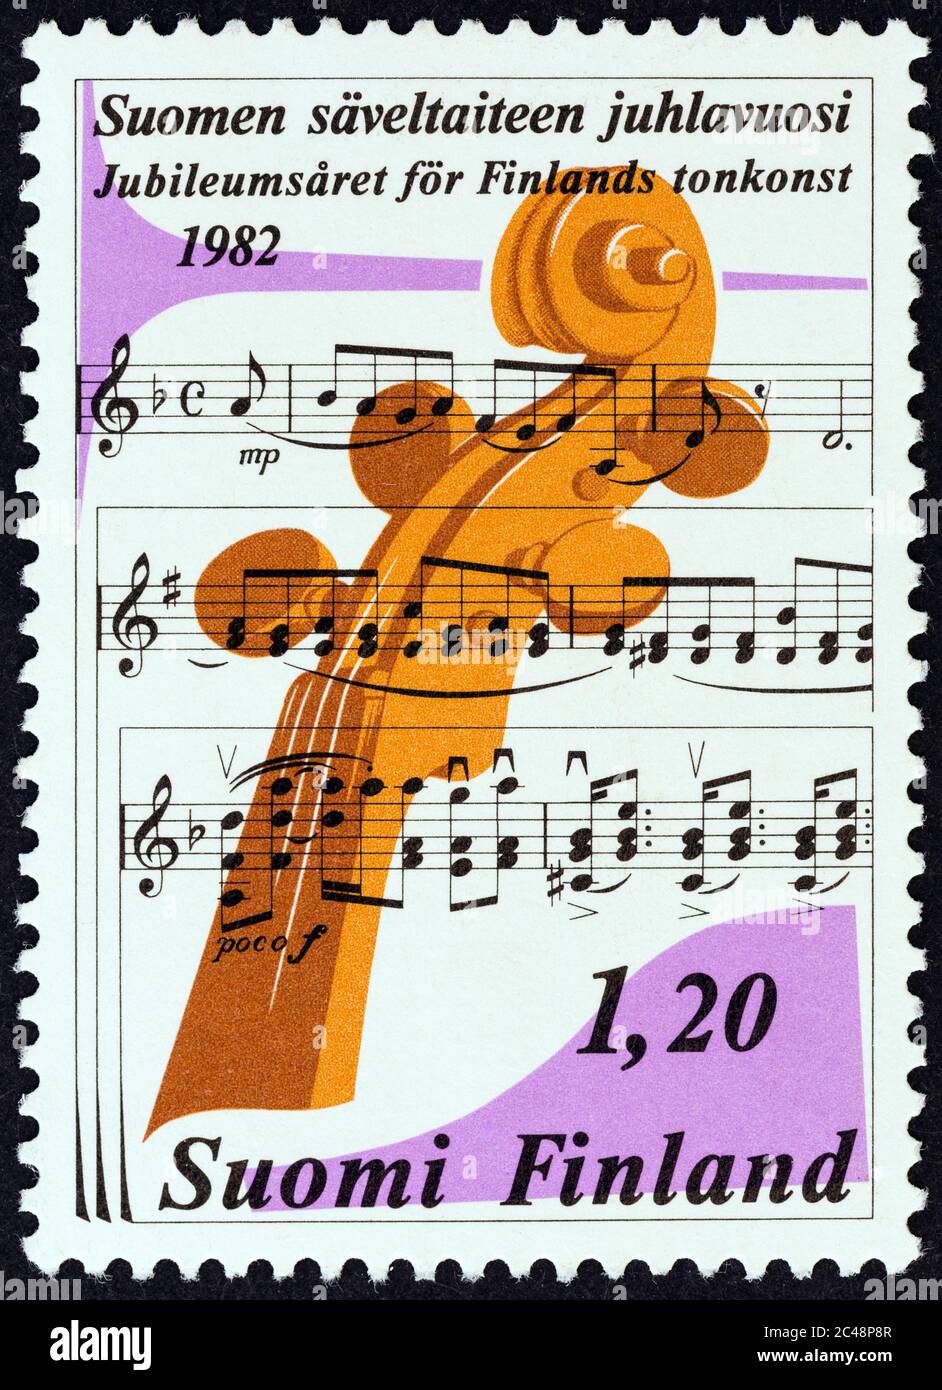 FINLAND - CIRCA 1982: A stamp printed in Finland shows Musical notation and Peghead of a stringed instrument, circa 1982. Stock Photo